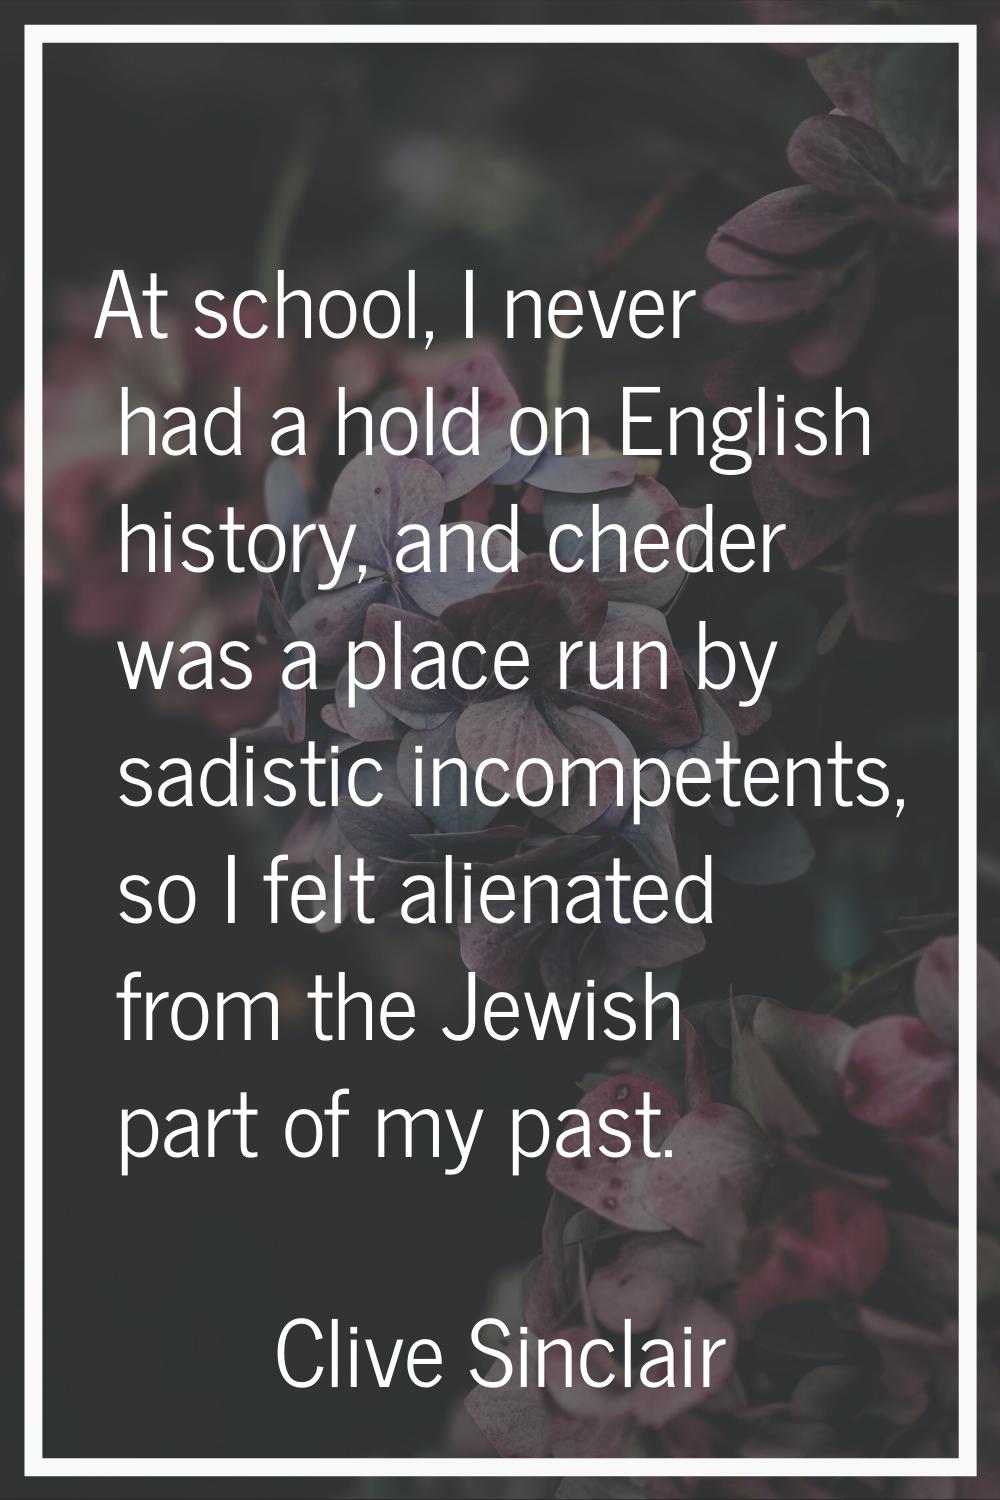 At school, I never had a hold on English history, and cheder was a place run by sadistic incompeten